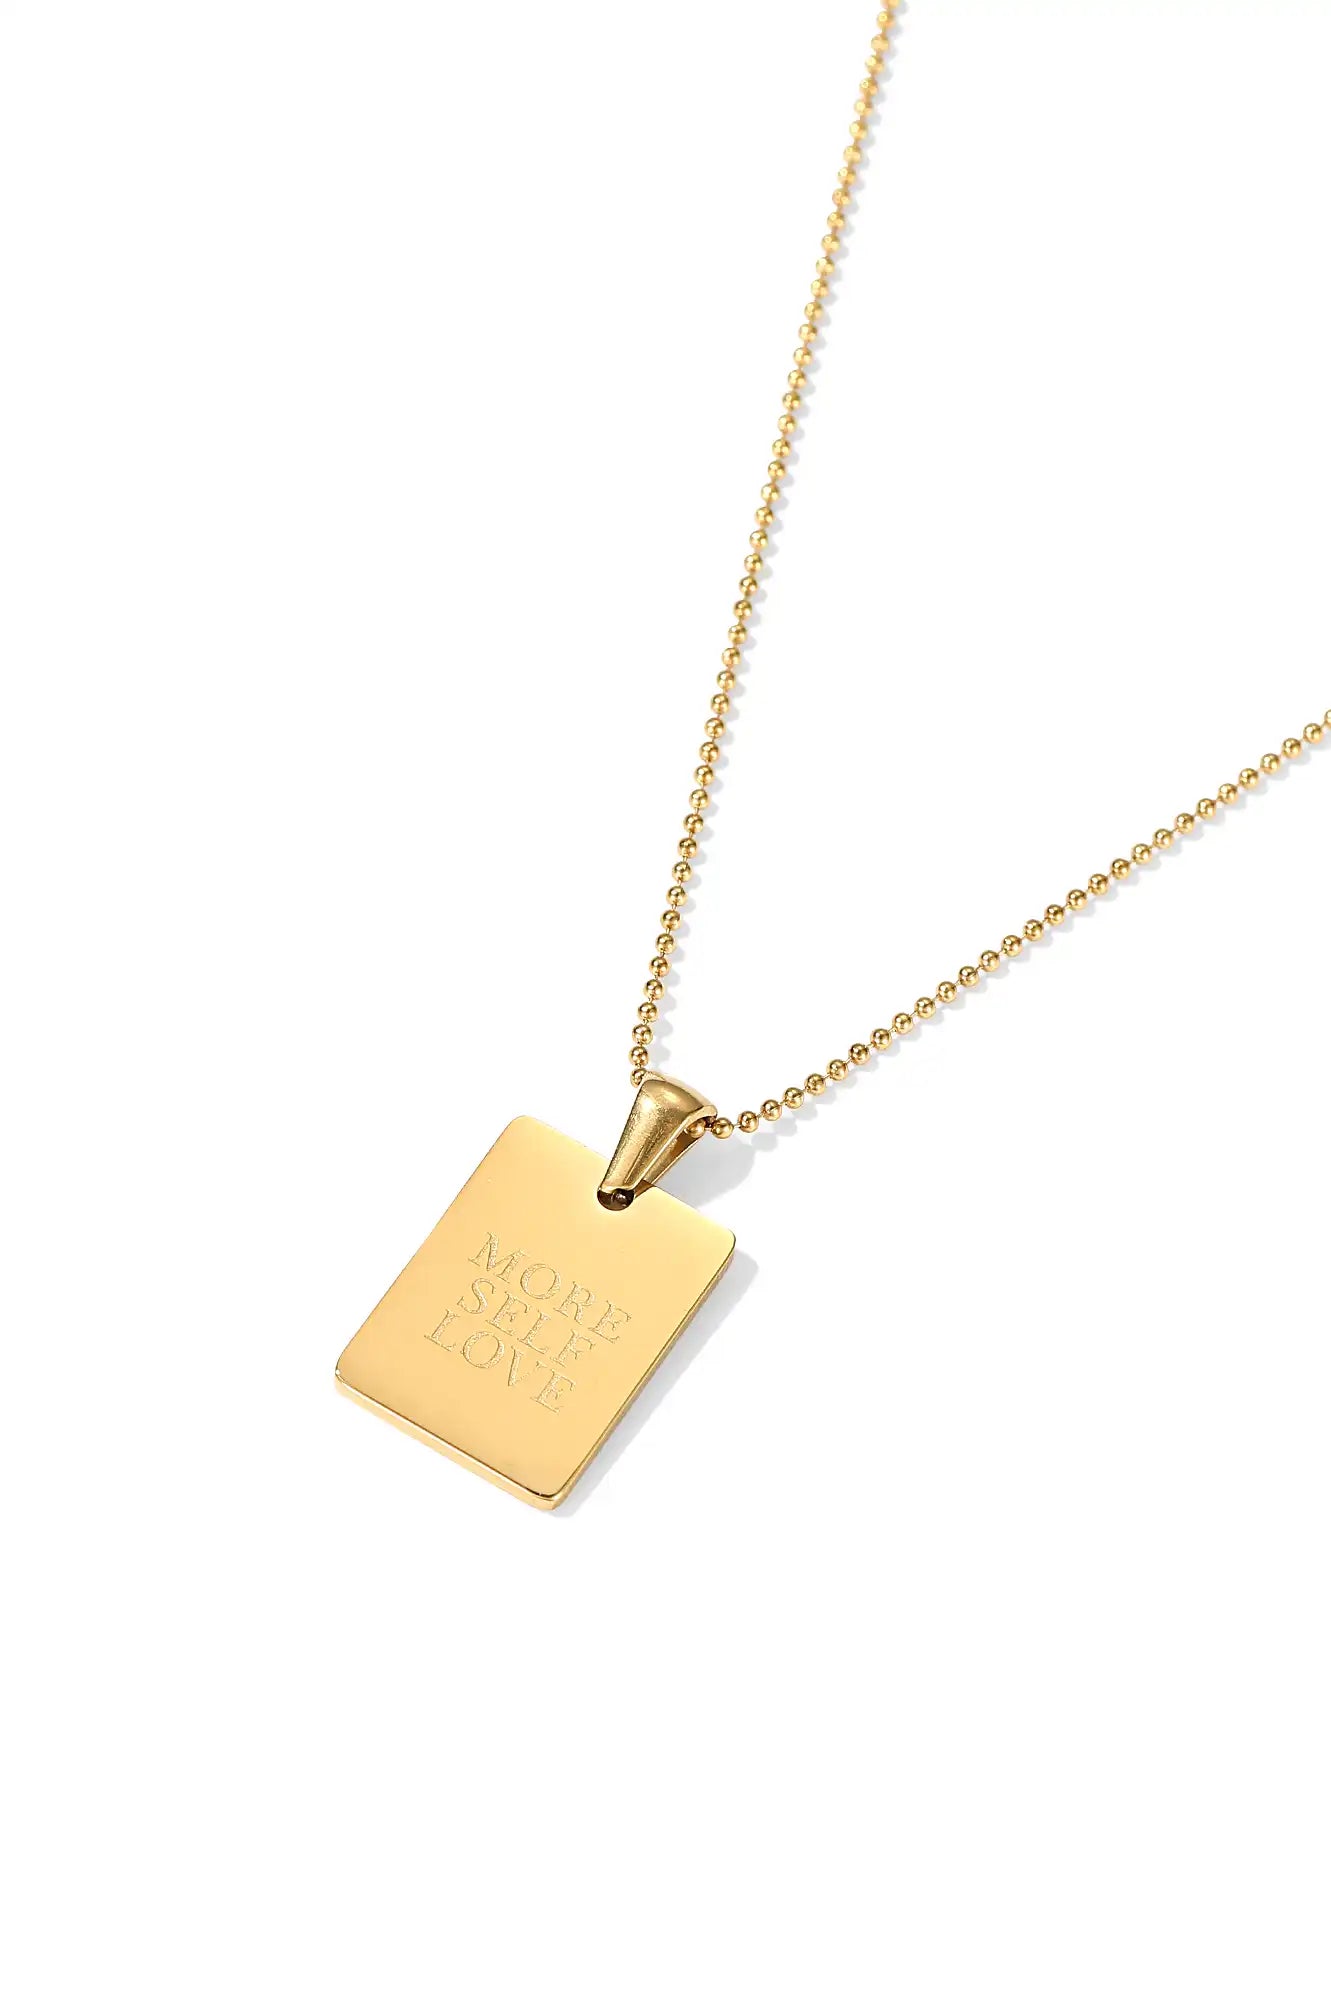 gold necklace with pendant